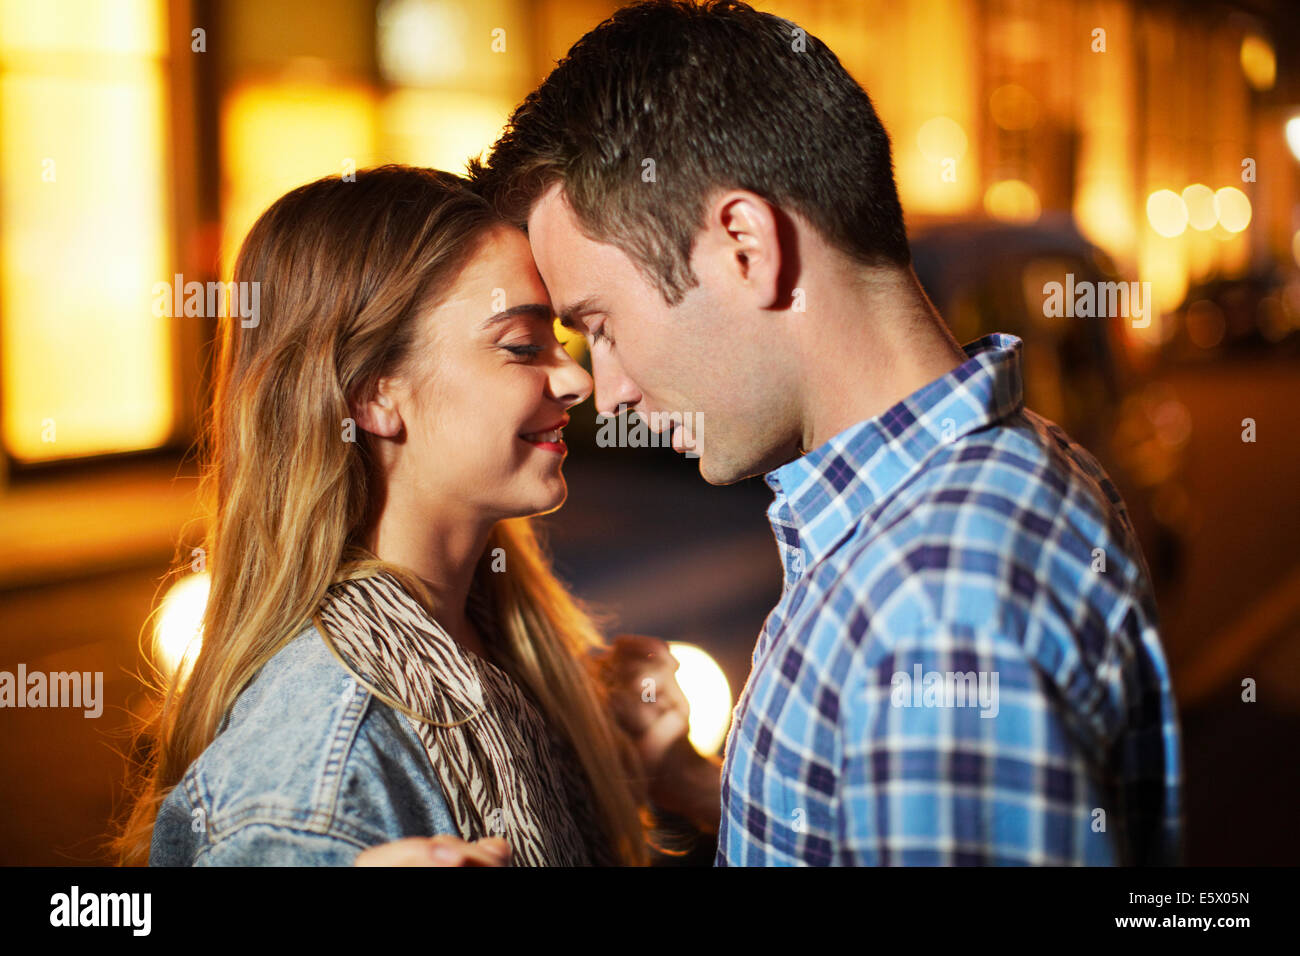 Romantic couple face to face city street at night Stock Photo